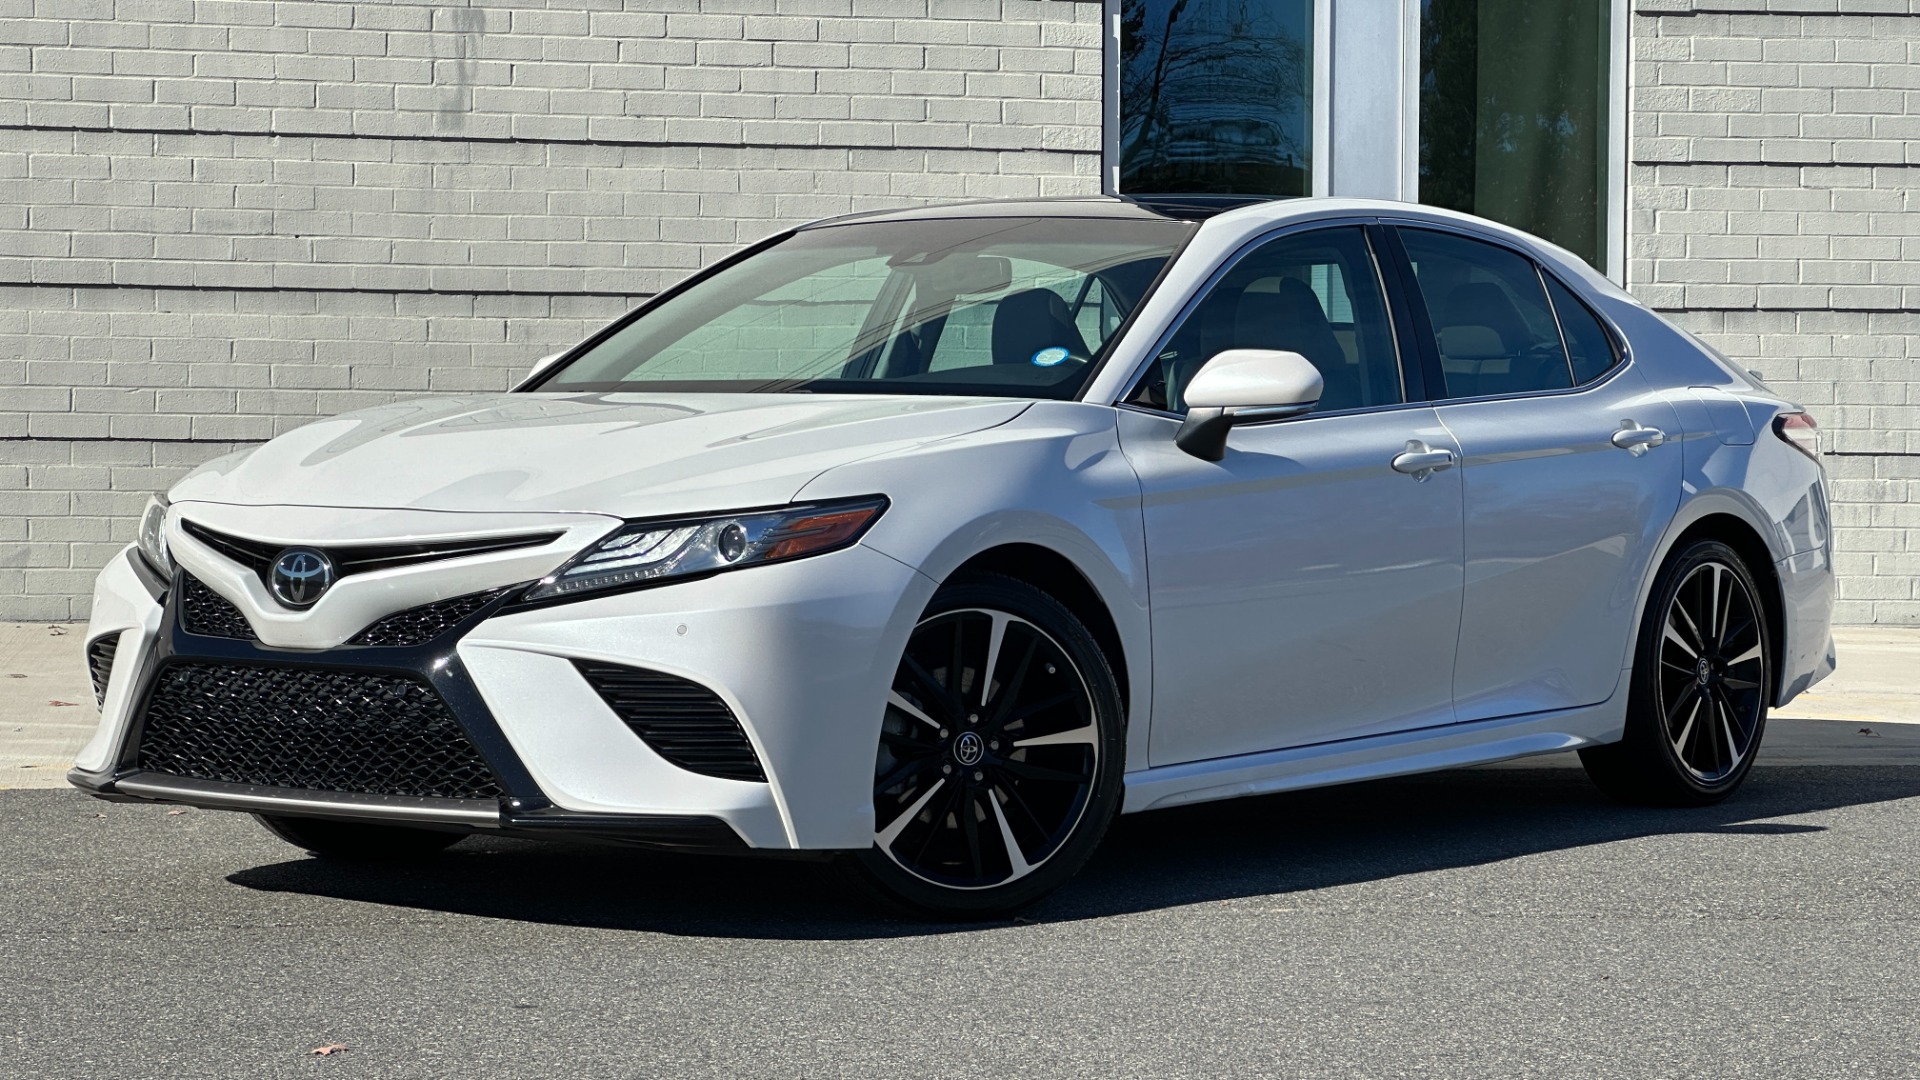 Used 2018 Toyota Camry XSE / PANORAMIC ROOF / ENTUNE / HEATED SEATS / BACKUP CAMERA for sale $23,999 at Formula Imports in Charlotte NC 28227 1